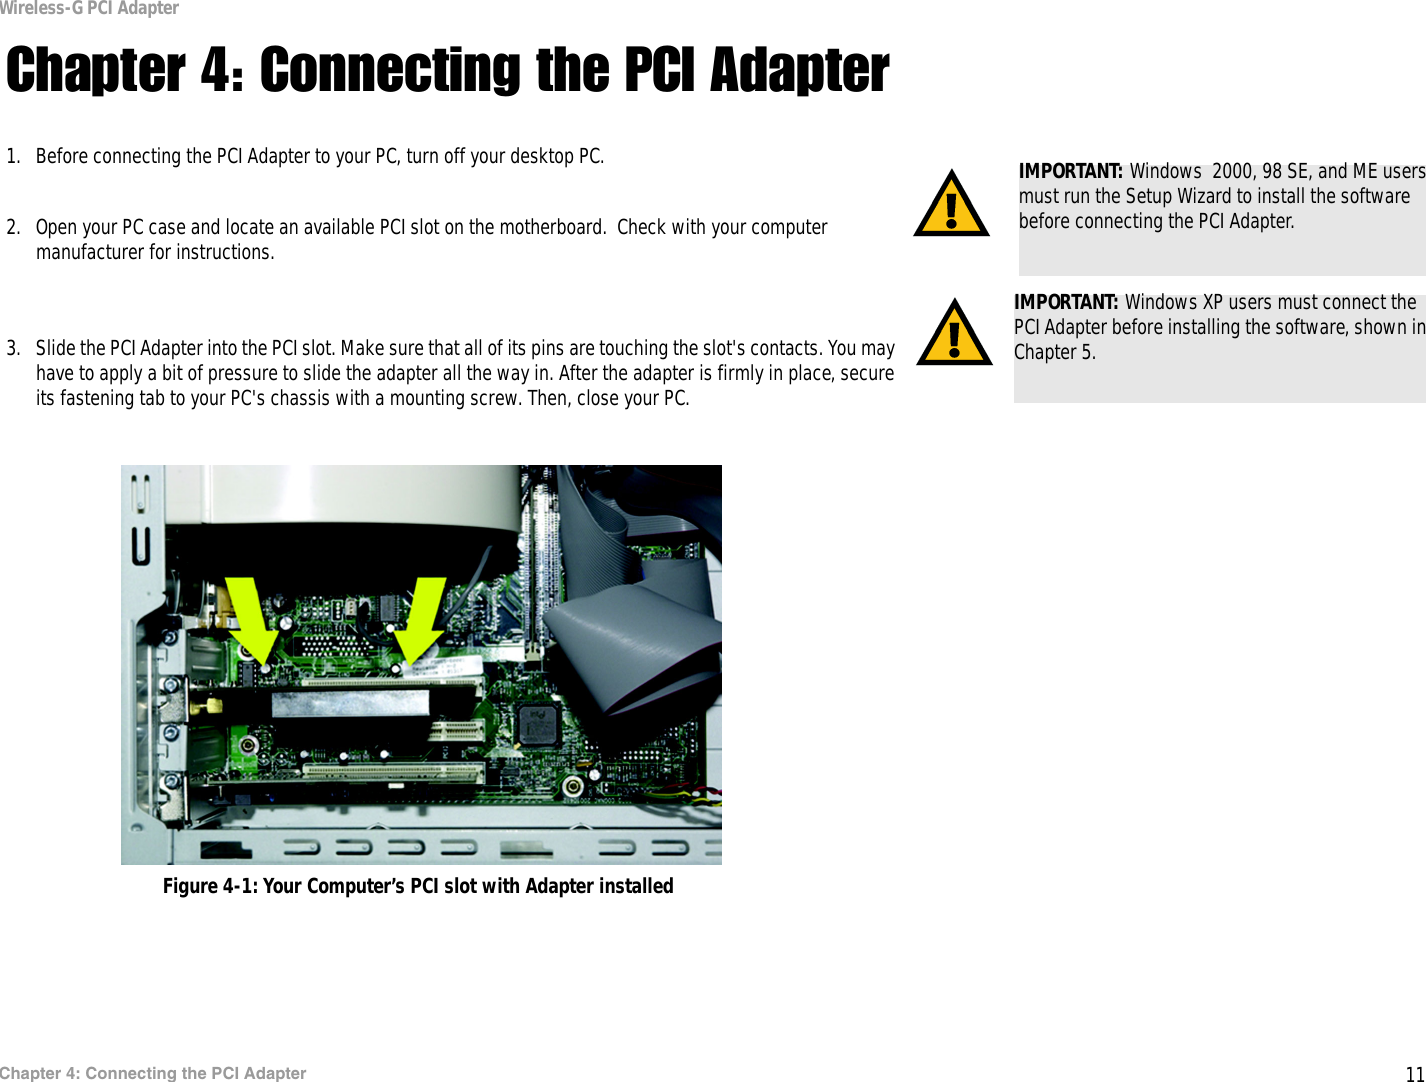 11Chapter 4: Connecting the PCI AdapterWireless-G PCI AdapterChapter 4: Connecting the PCI Adapter1. Before connecting the PCI Adapter to your PC, turn off your desktop PC.  2. Open your PC case and locate an available PCI slot on the motherboard.  Check with your computer manufacturer for instructions. 3. Slide the PCI Adapter into the PCI slot. Make sure that all of its pins are touching the slot&apos;s contacts. You may have to apply a bit of pressure to slide the adapter all the way in. After the adapter is firmly in place, secure its fastening tab to your PC&apos;s chassis with a mounting screw. Then, close your PC. IMPORTANT: Windows XP users must connect the PCI Adapter before installing the software, shown in Chapter 5.IMPORTANT: Windows  2000, 98 SE, and ME users must run the Setup Wizard to install the software before connecting the PCI Adapter.Figure 4-1: Your Computer’s PCI slot with Adapter installed